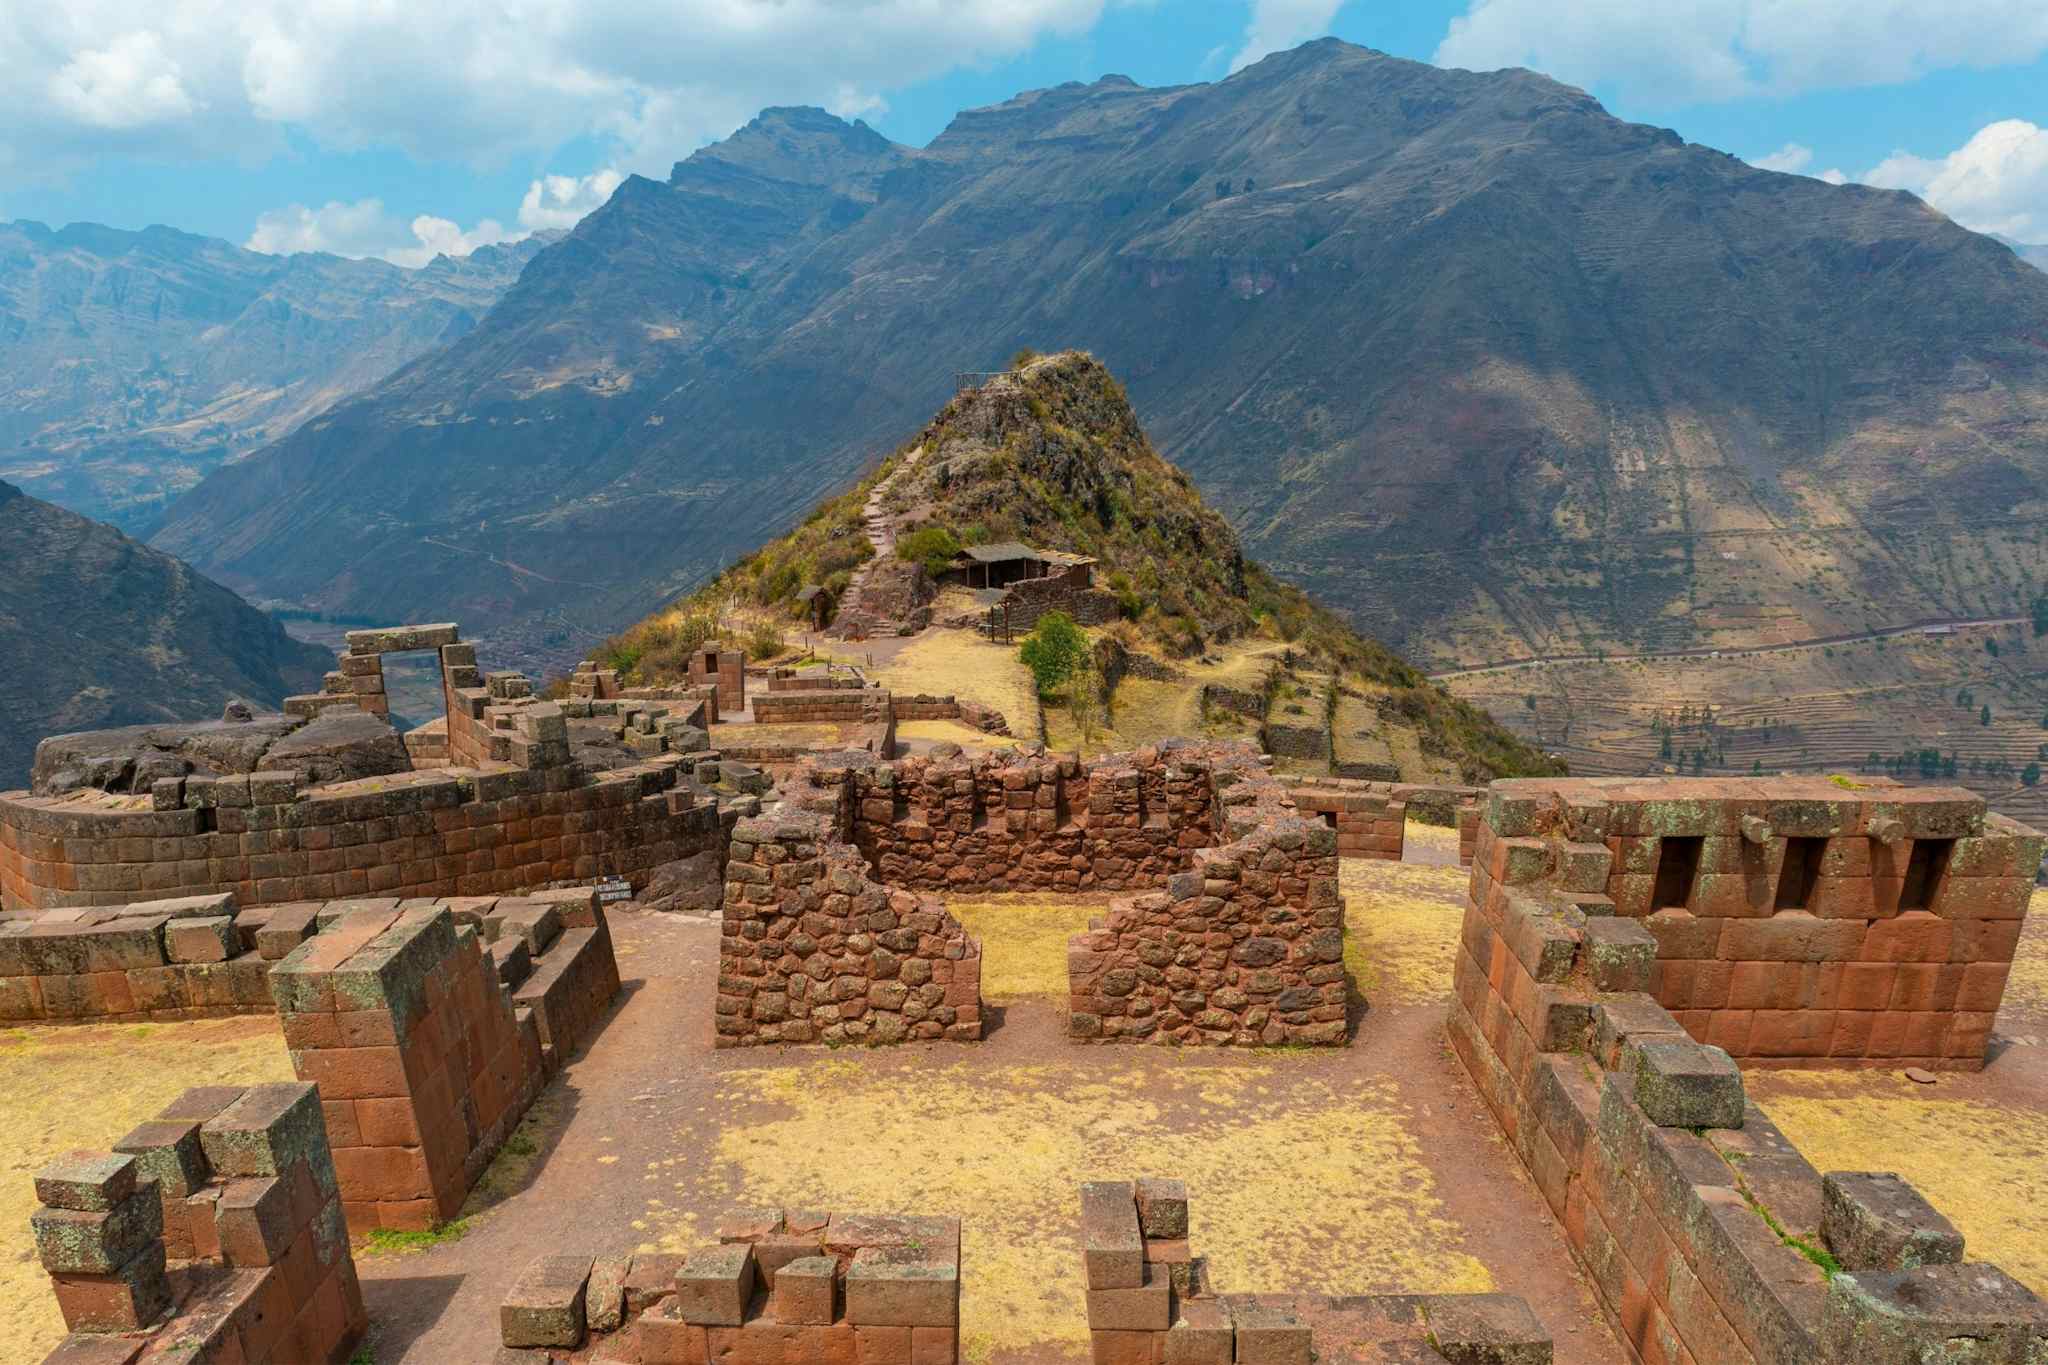 Pisca ruins overlooking the Andes mountains behind in Peru